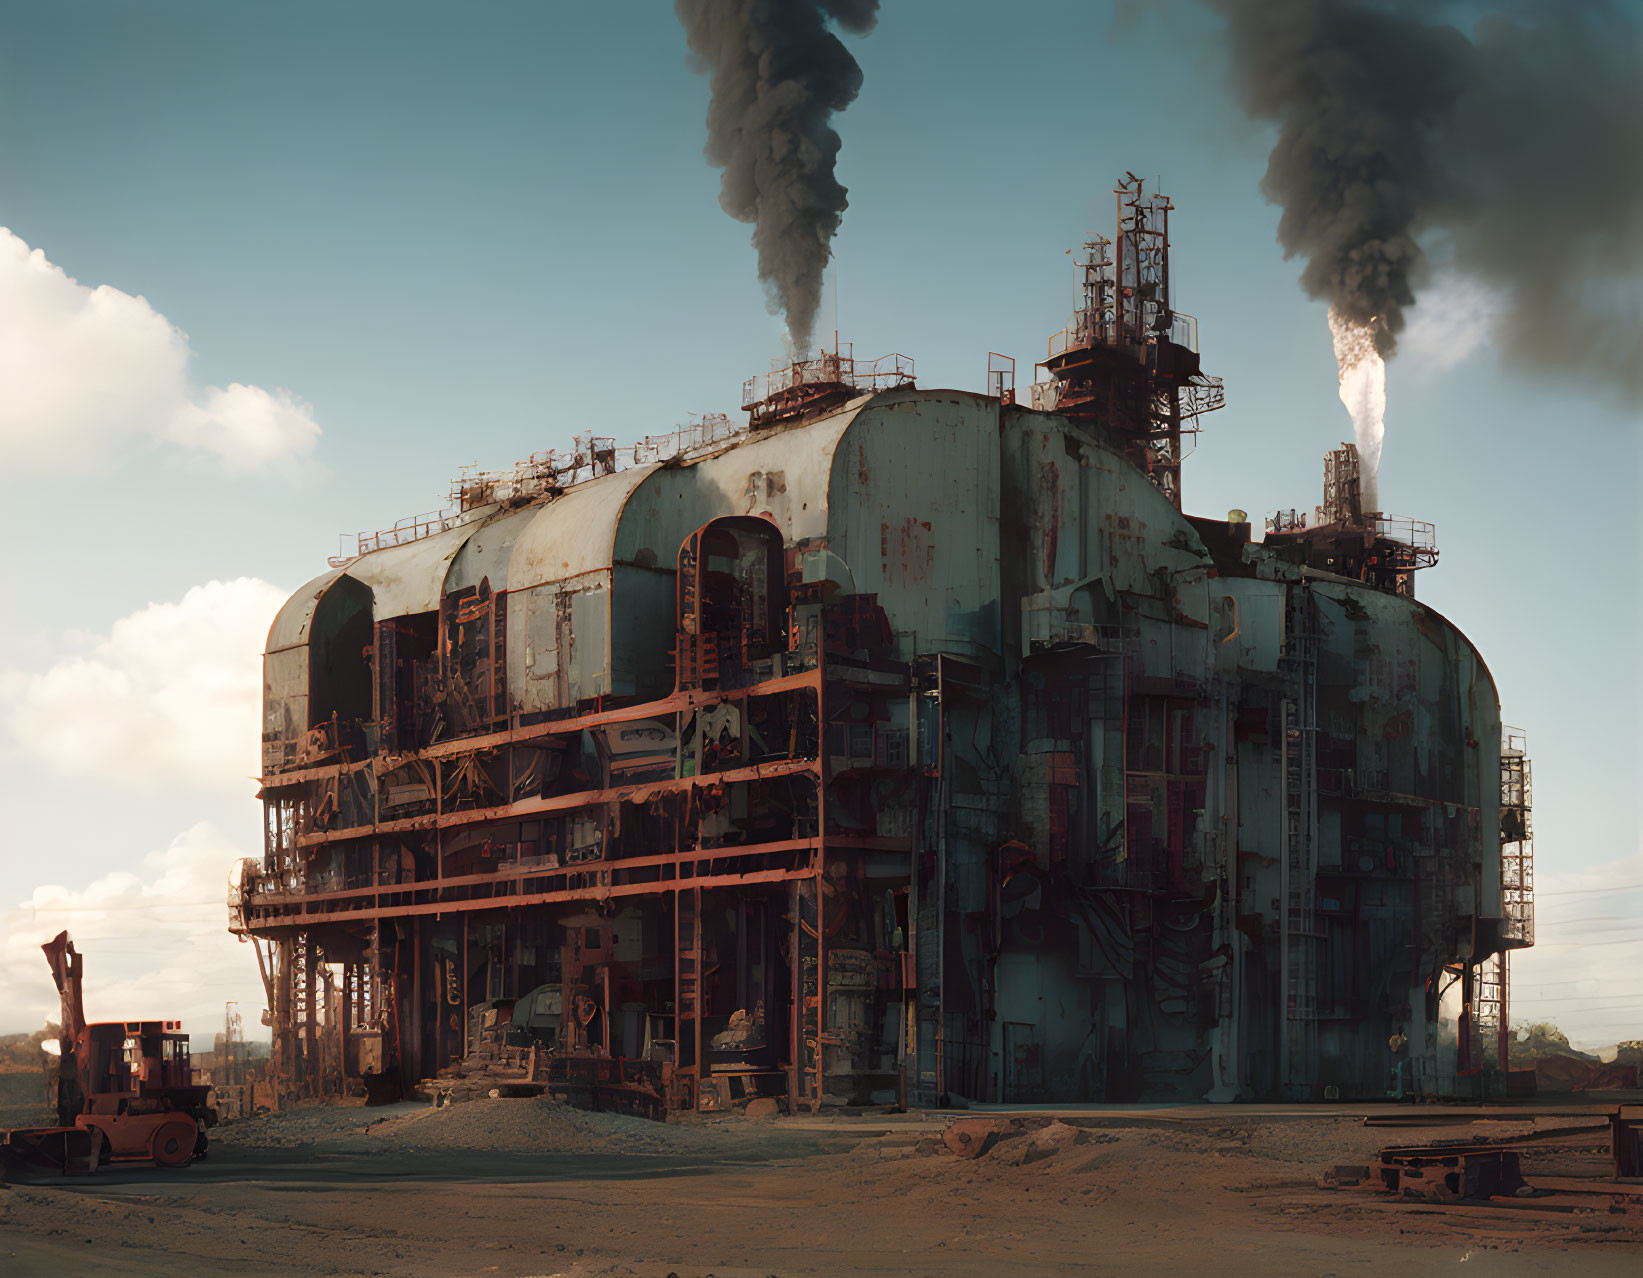 Industrial facility with smokestacks, rusted structures, and heavy machinery